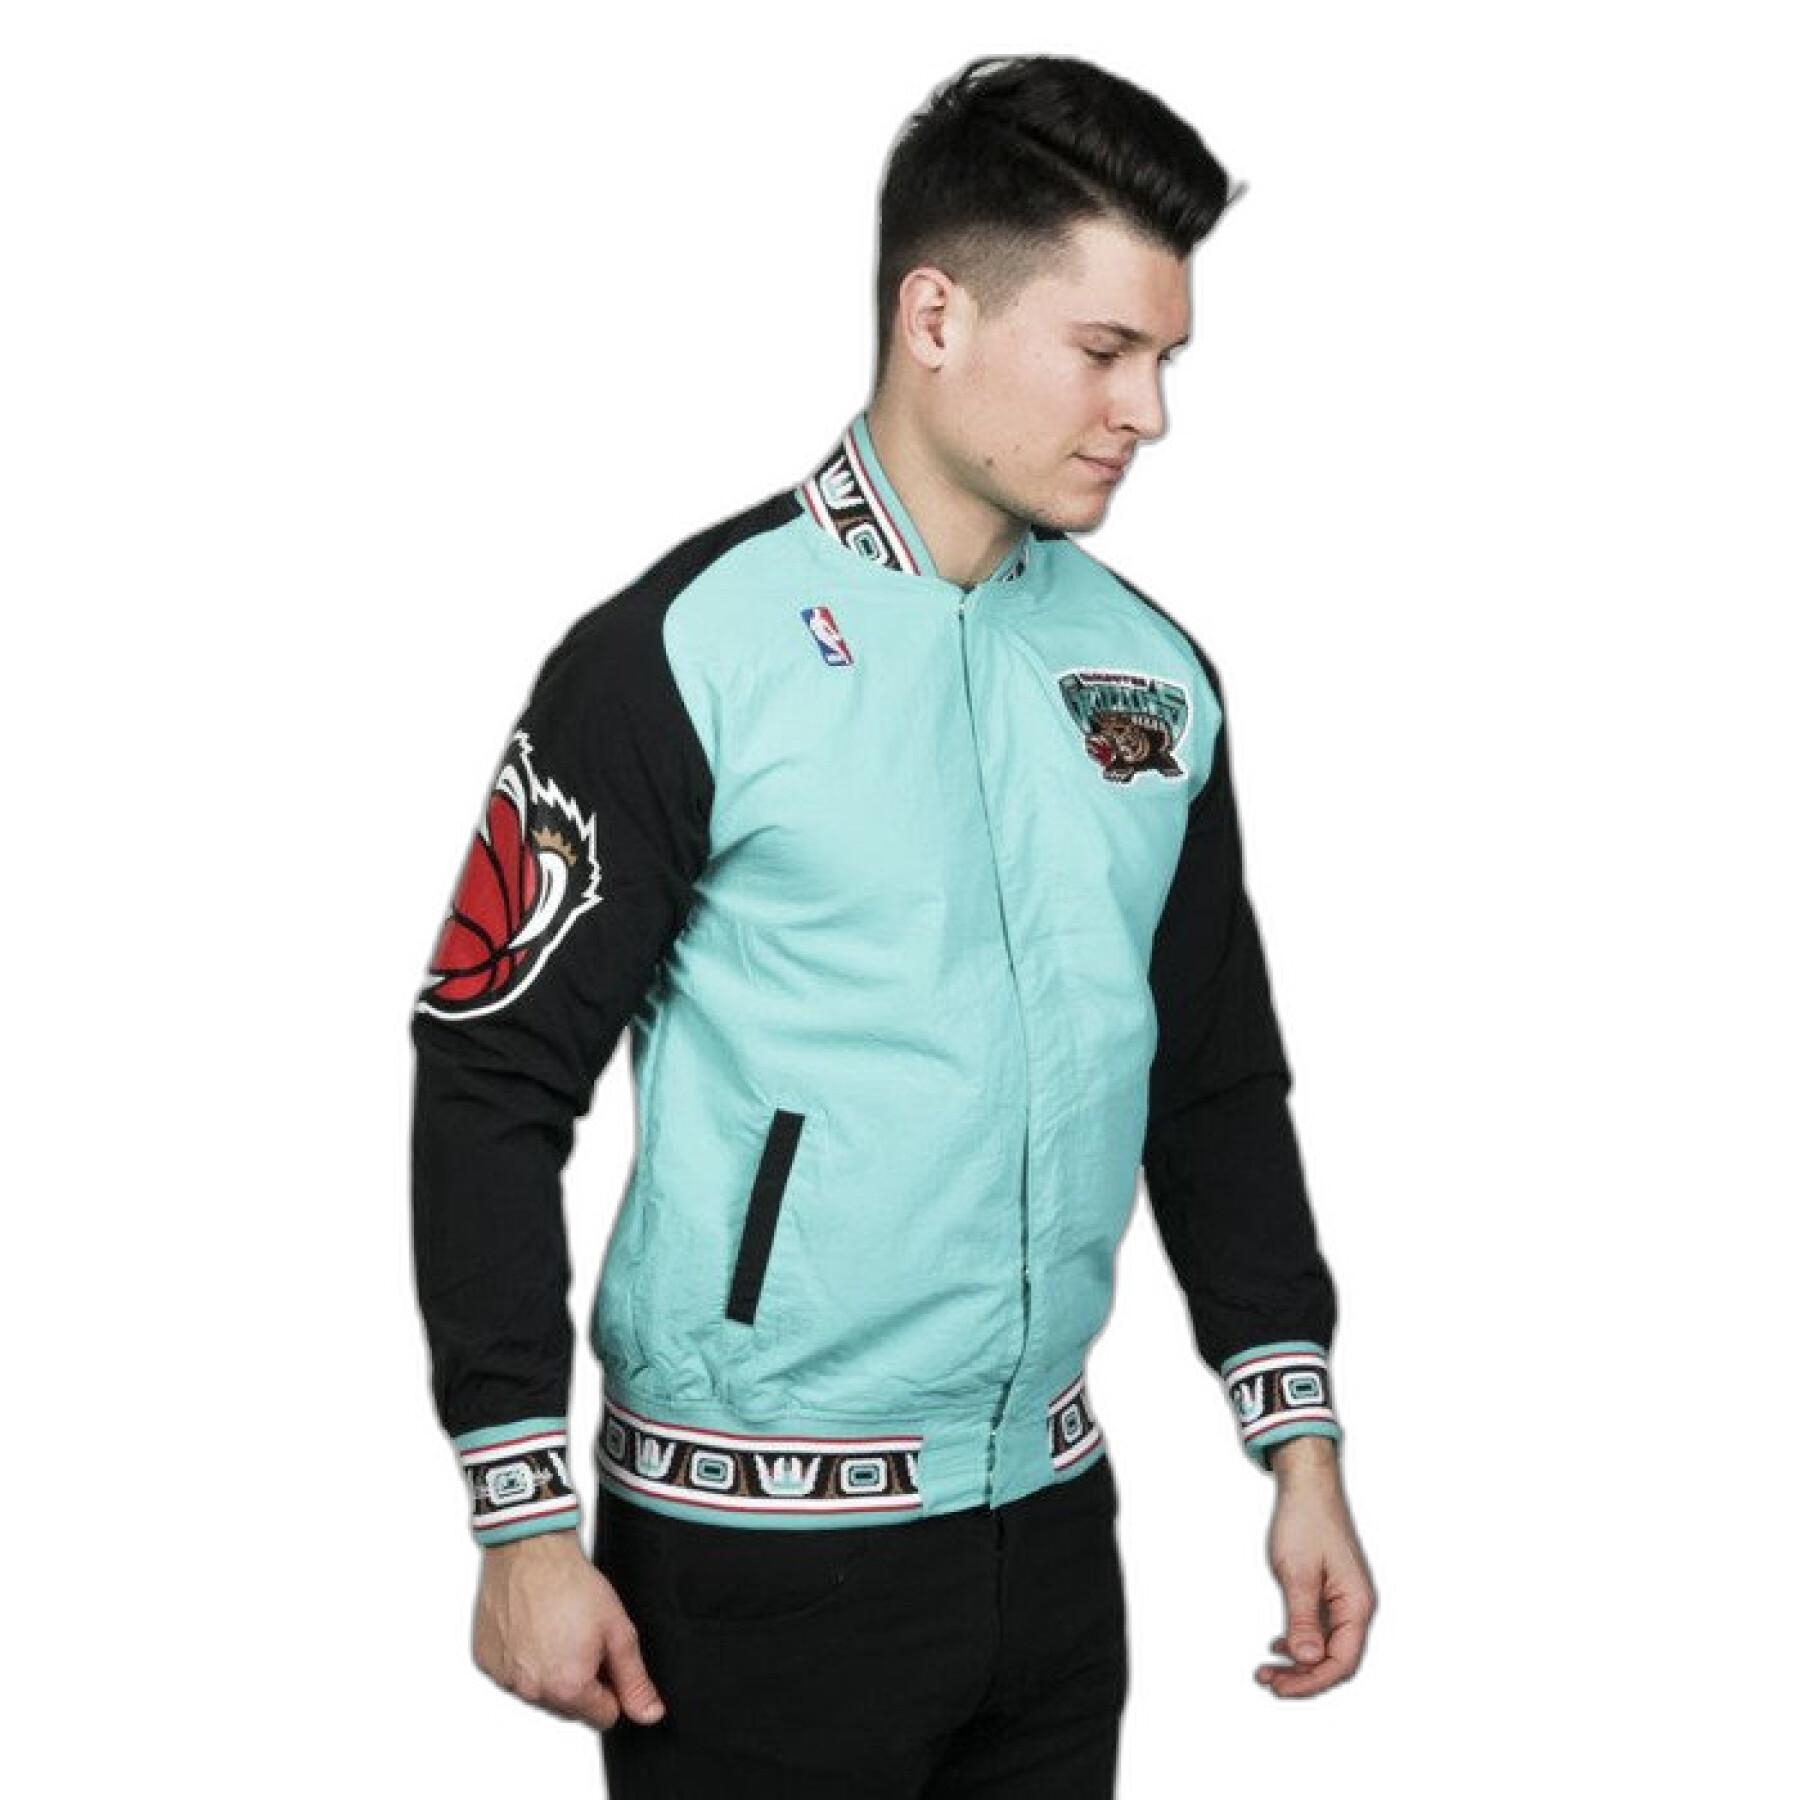 Giacca Vancouver Grizzlies authentic